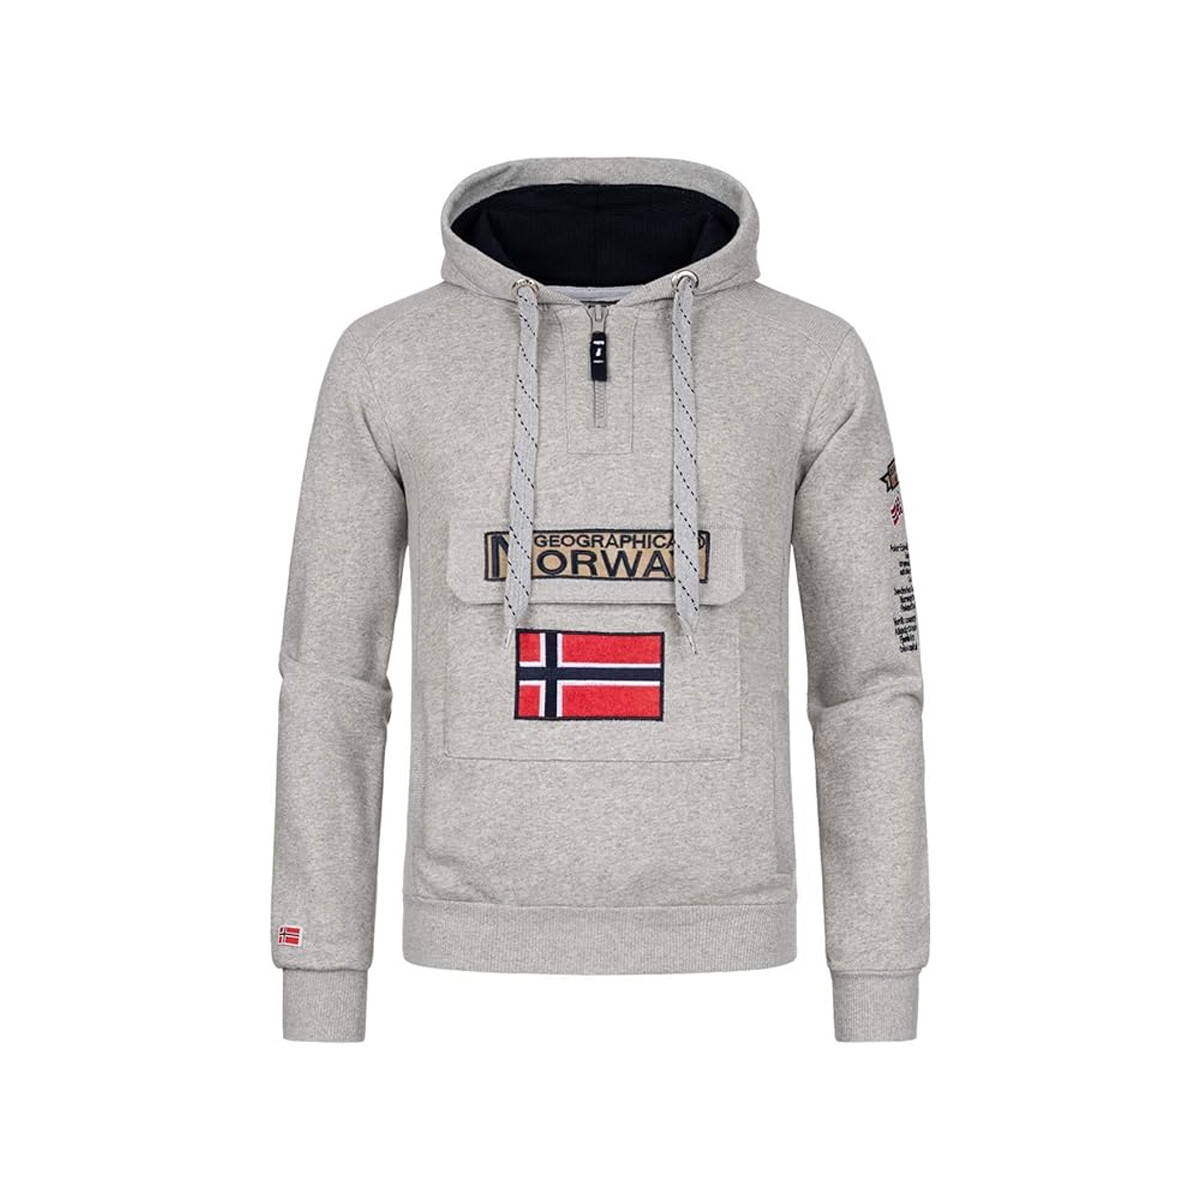 Textil Homem Sweats Geographical Norway  Cinza